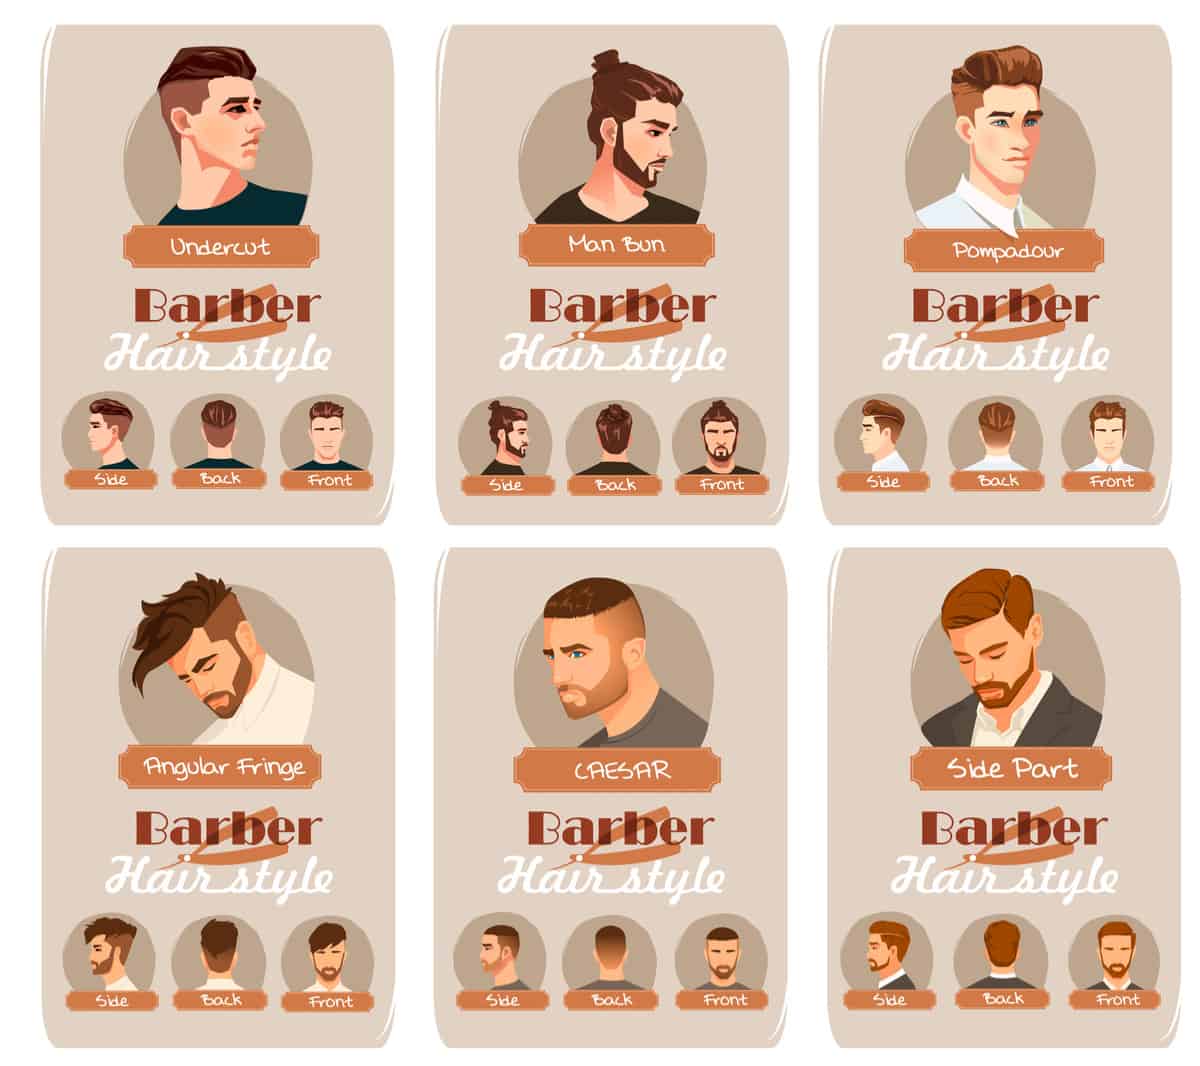 Chart illustrating 6 different men's popular hairstyles and cuts